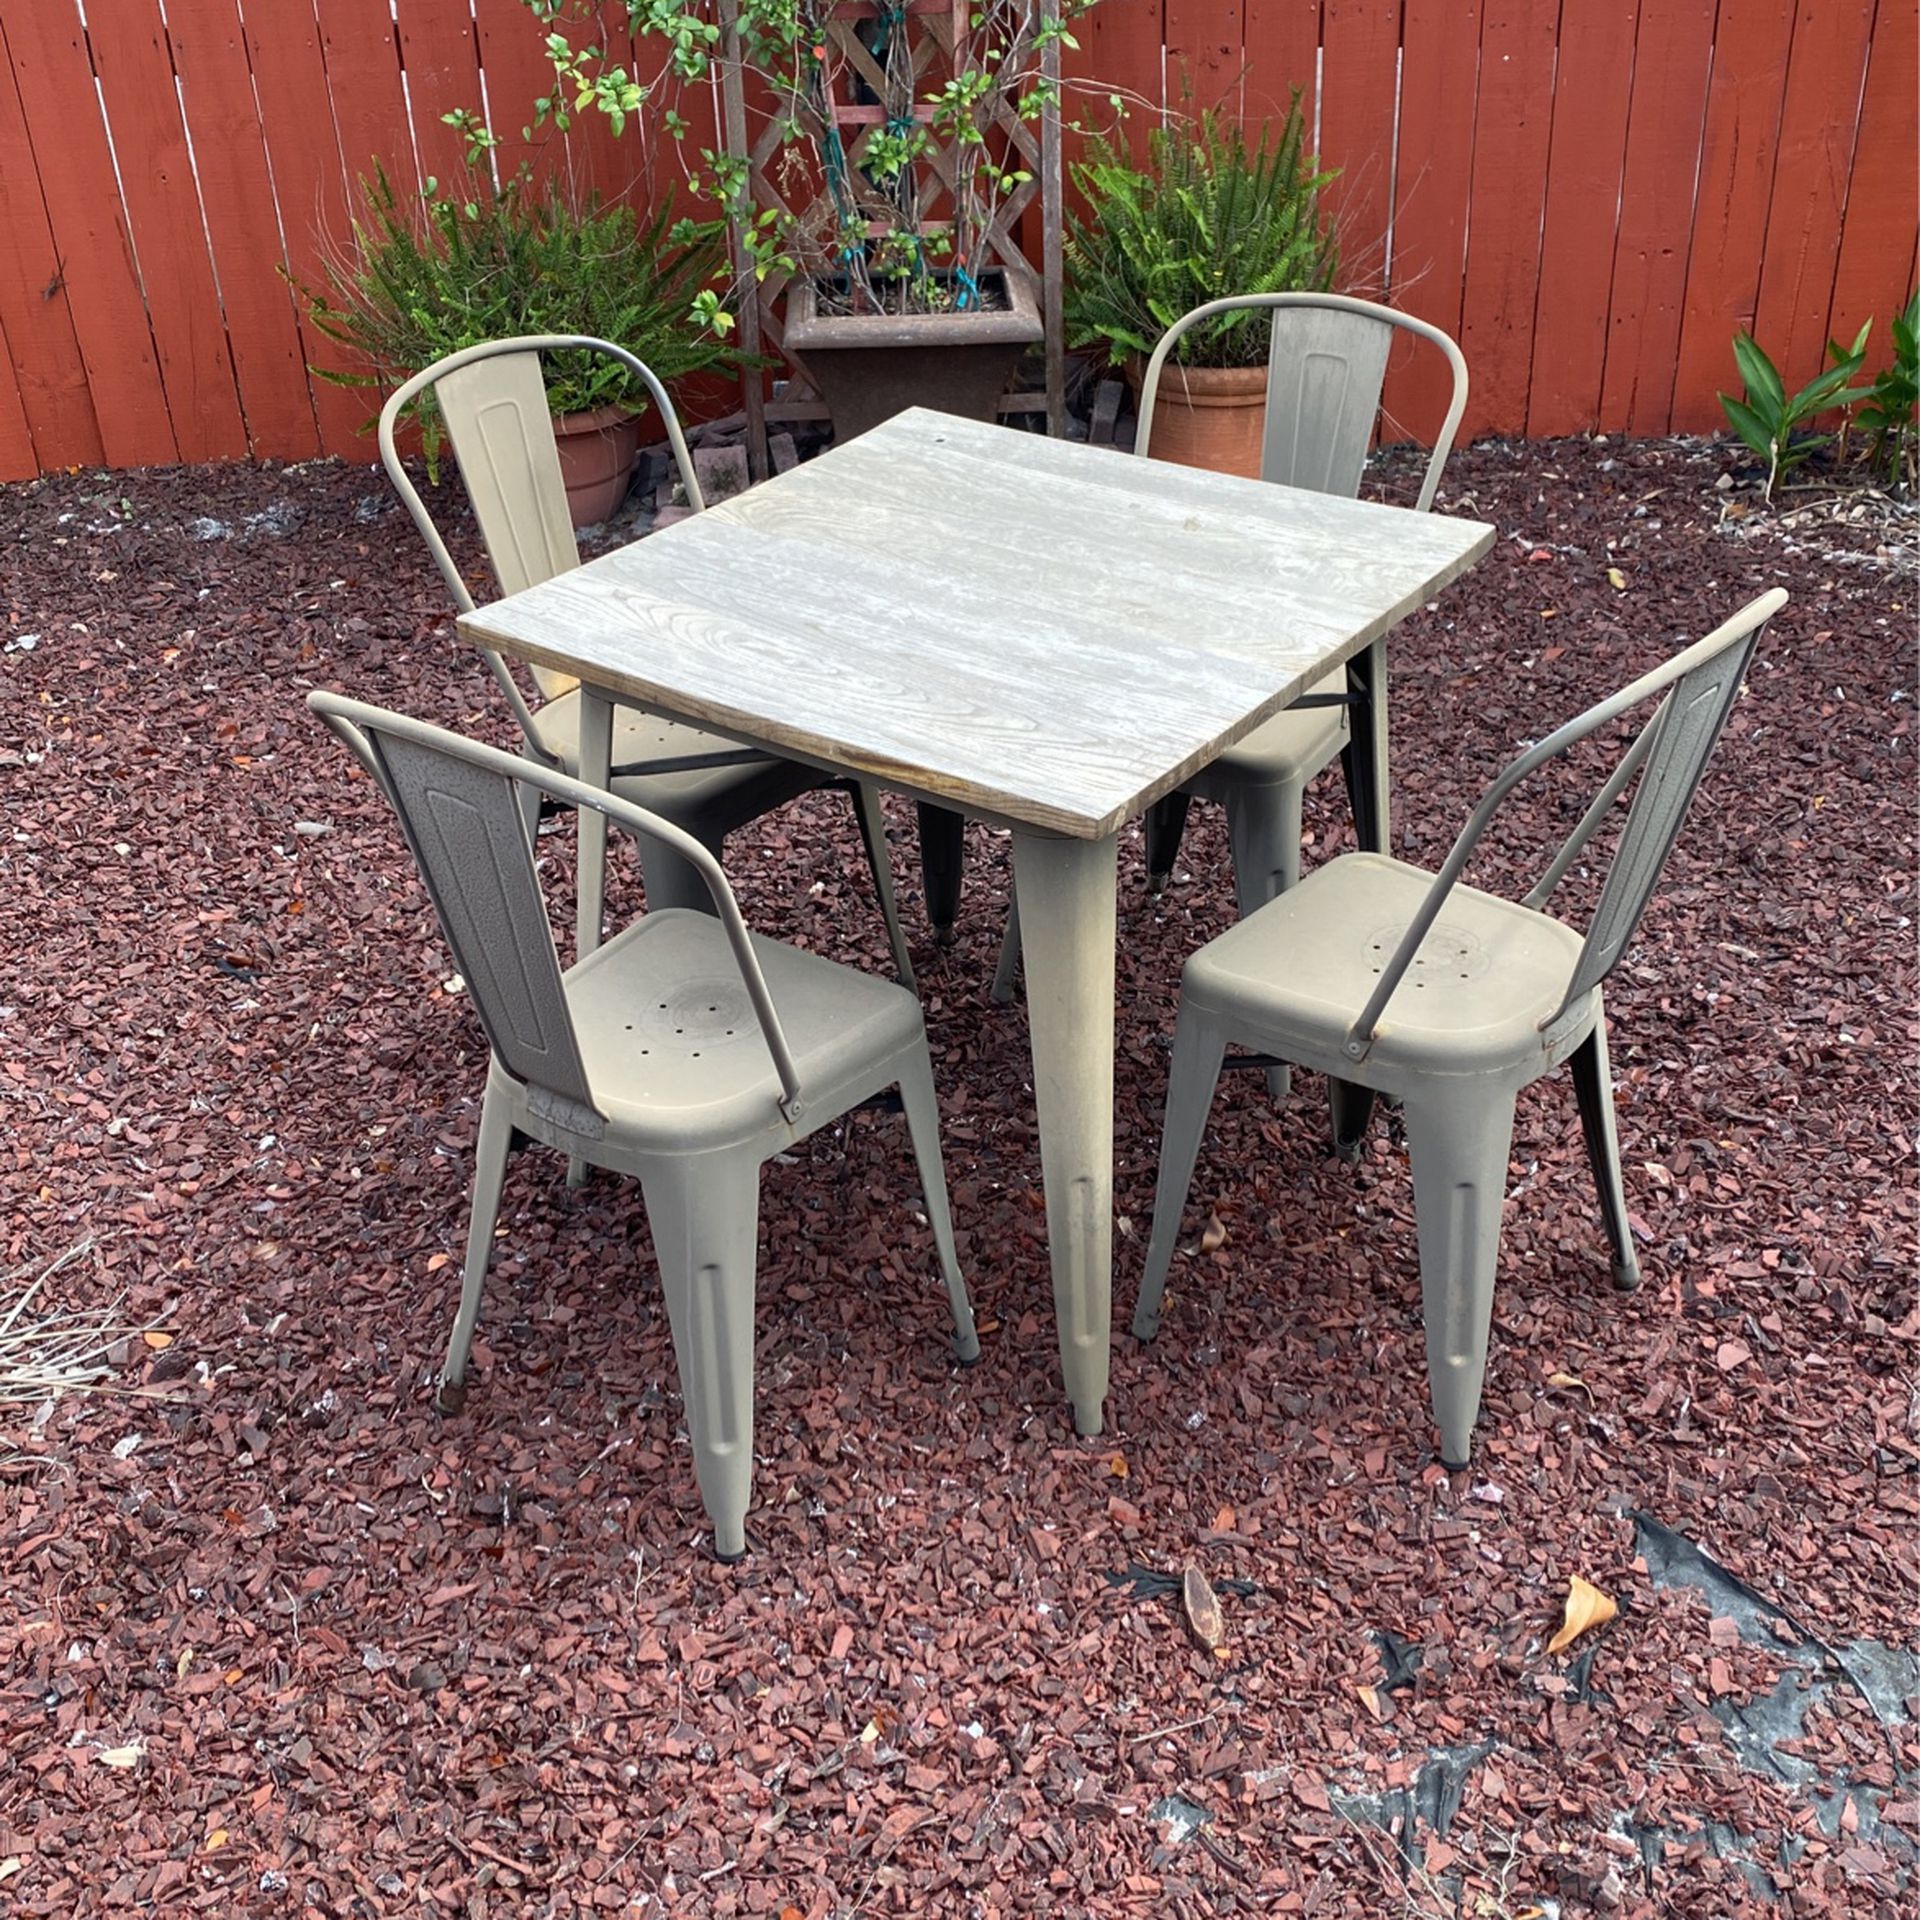 Outdoor patio seating, 4 Metal Chairs & Wooden Table Top